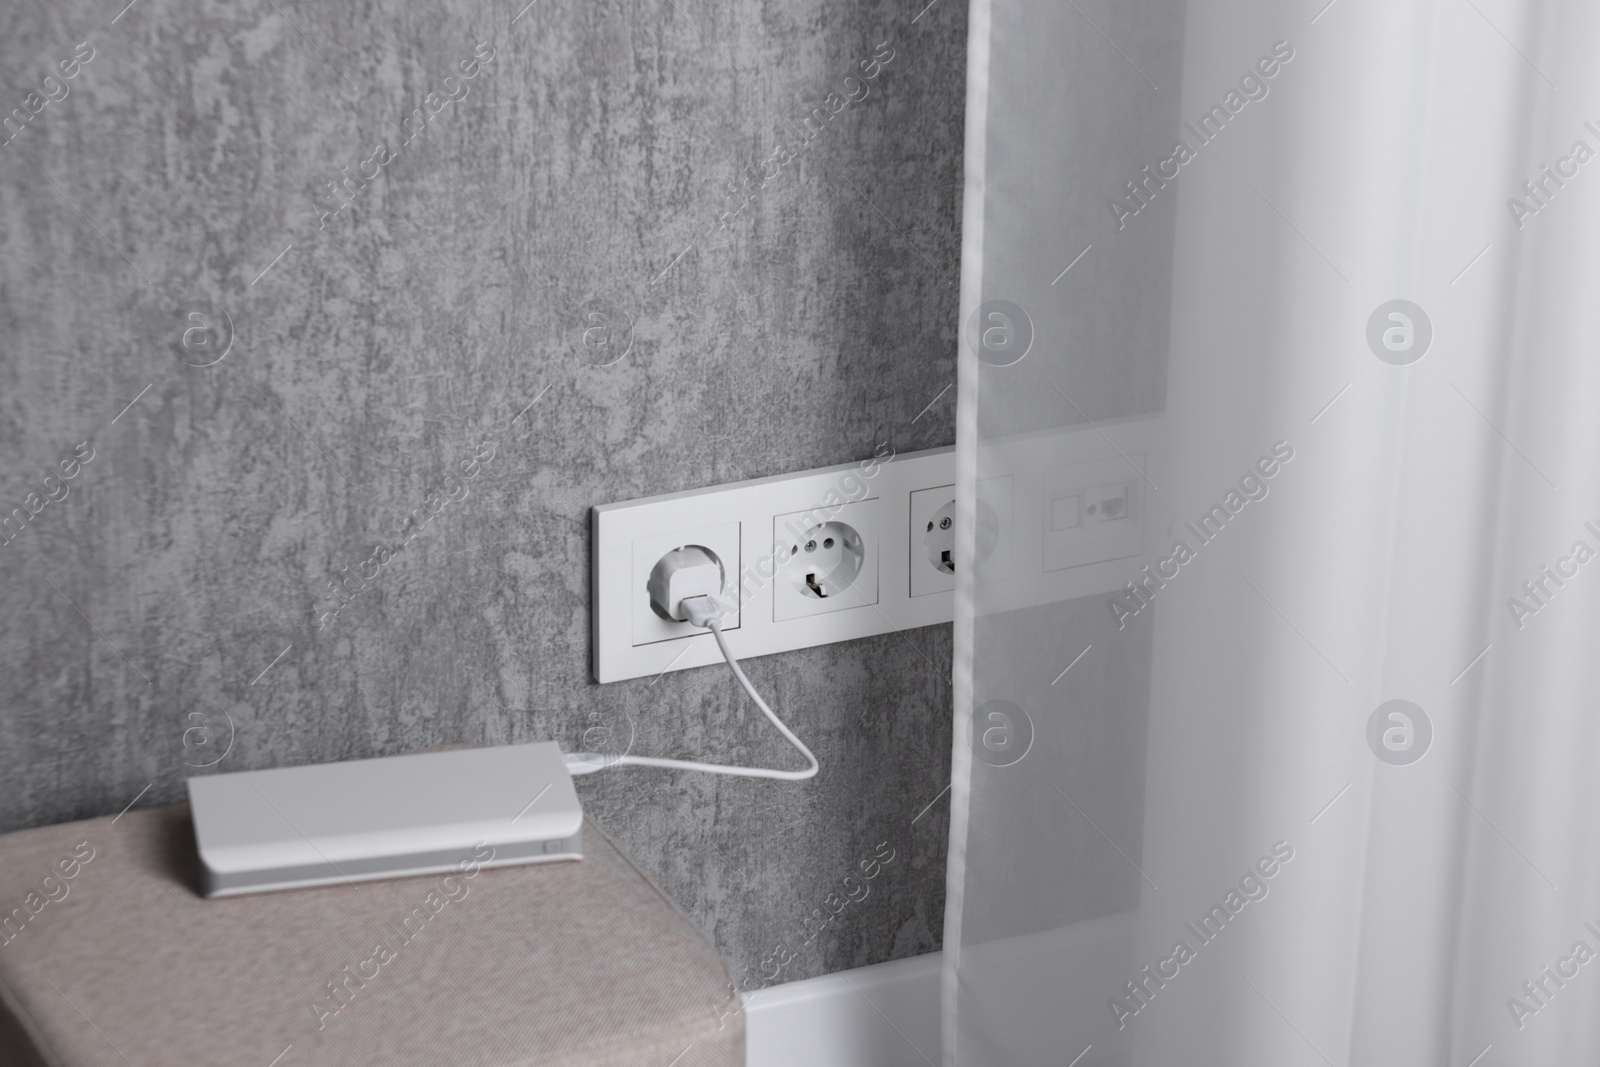 Photo of Power bank plugged into electric socket on grey wall